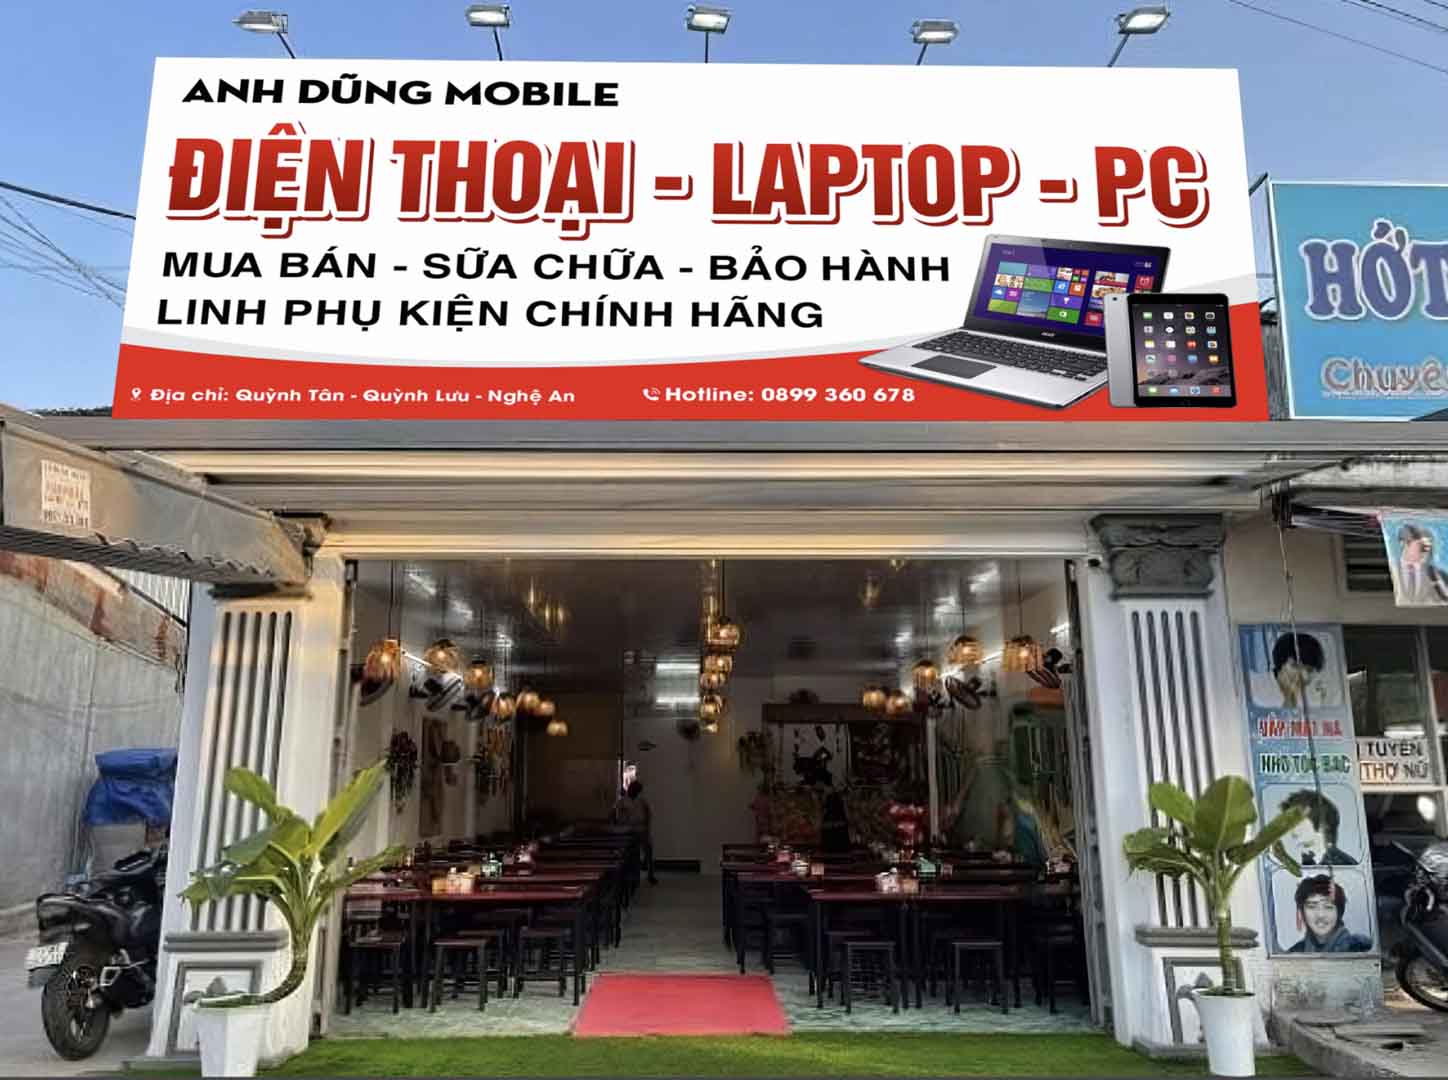 anh dung mobile - dien t hoai - laptop - pc 2.jpg